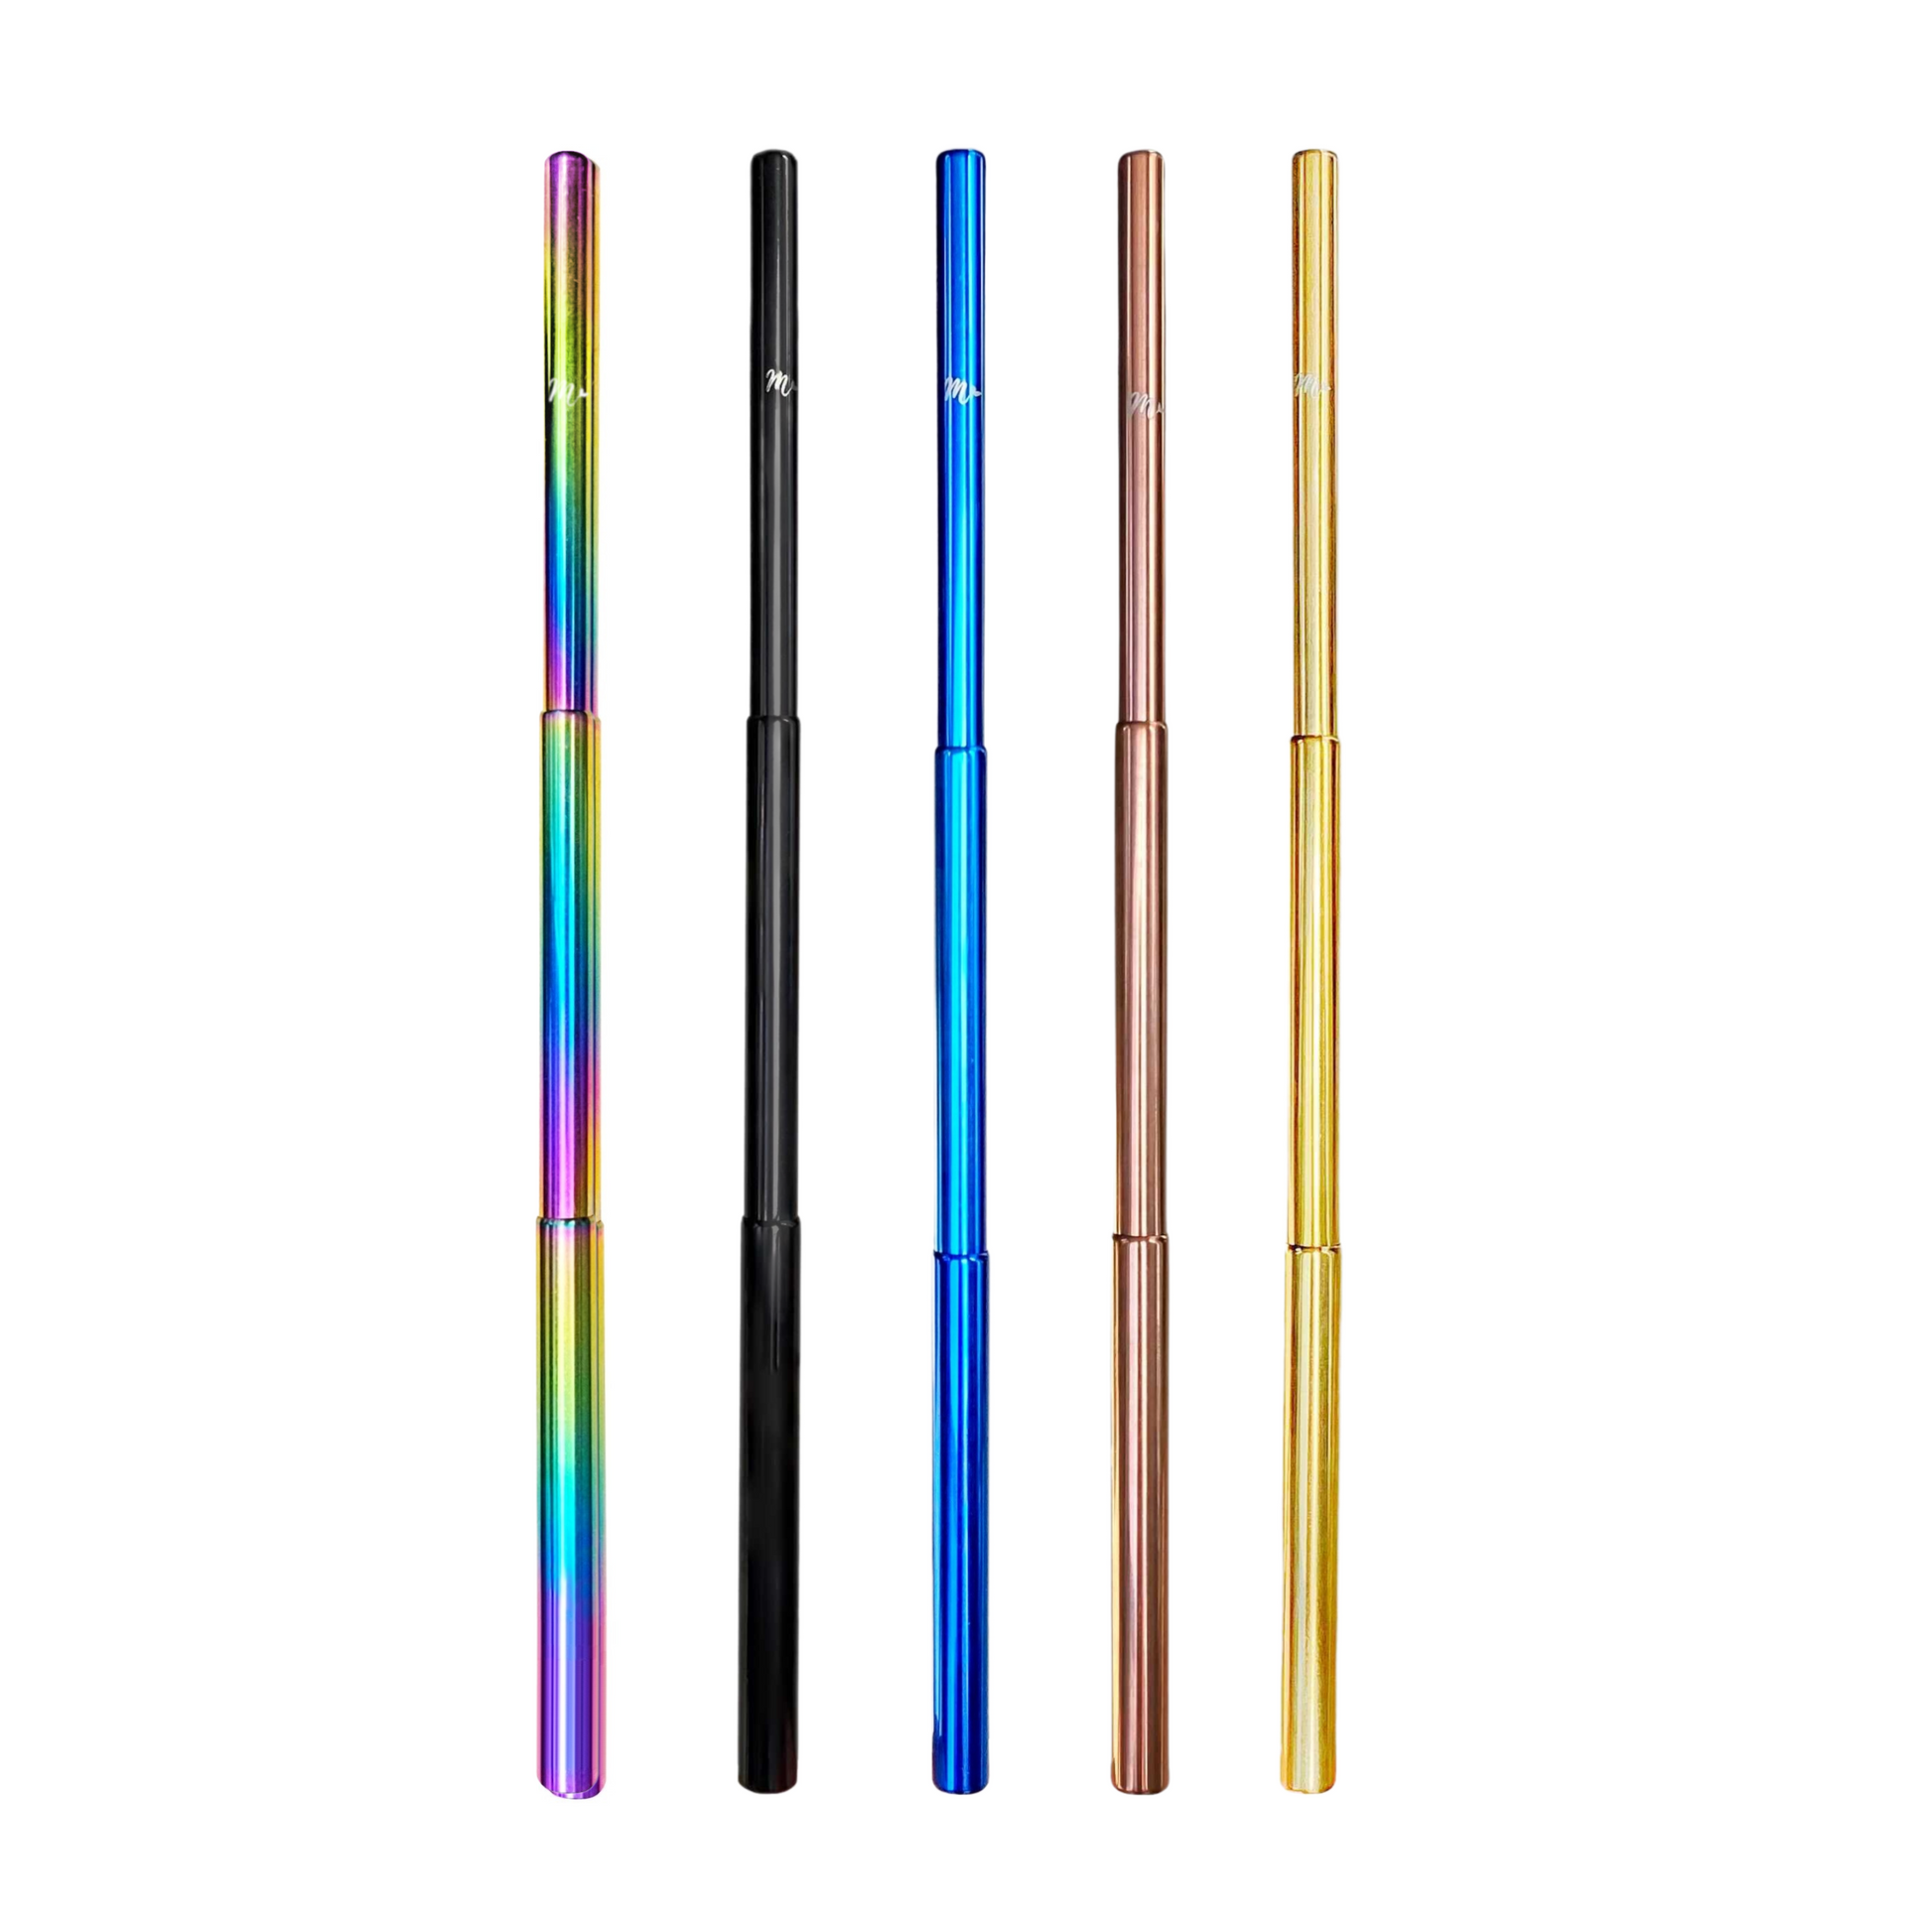 Mermaid Telescopic Straw, Siren Telescopic Straw, Ocean Blue Telescopic Straw, Rose Gold Telescopic Straw, Gold Telescopic Straw, Mermaid Straws Telescopic Straws that collapse and are easy to take on-the-go